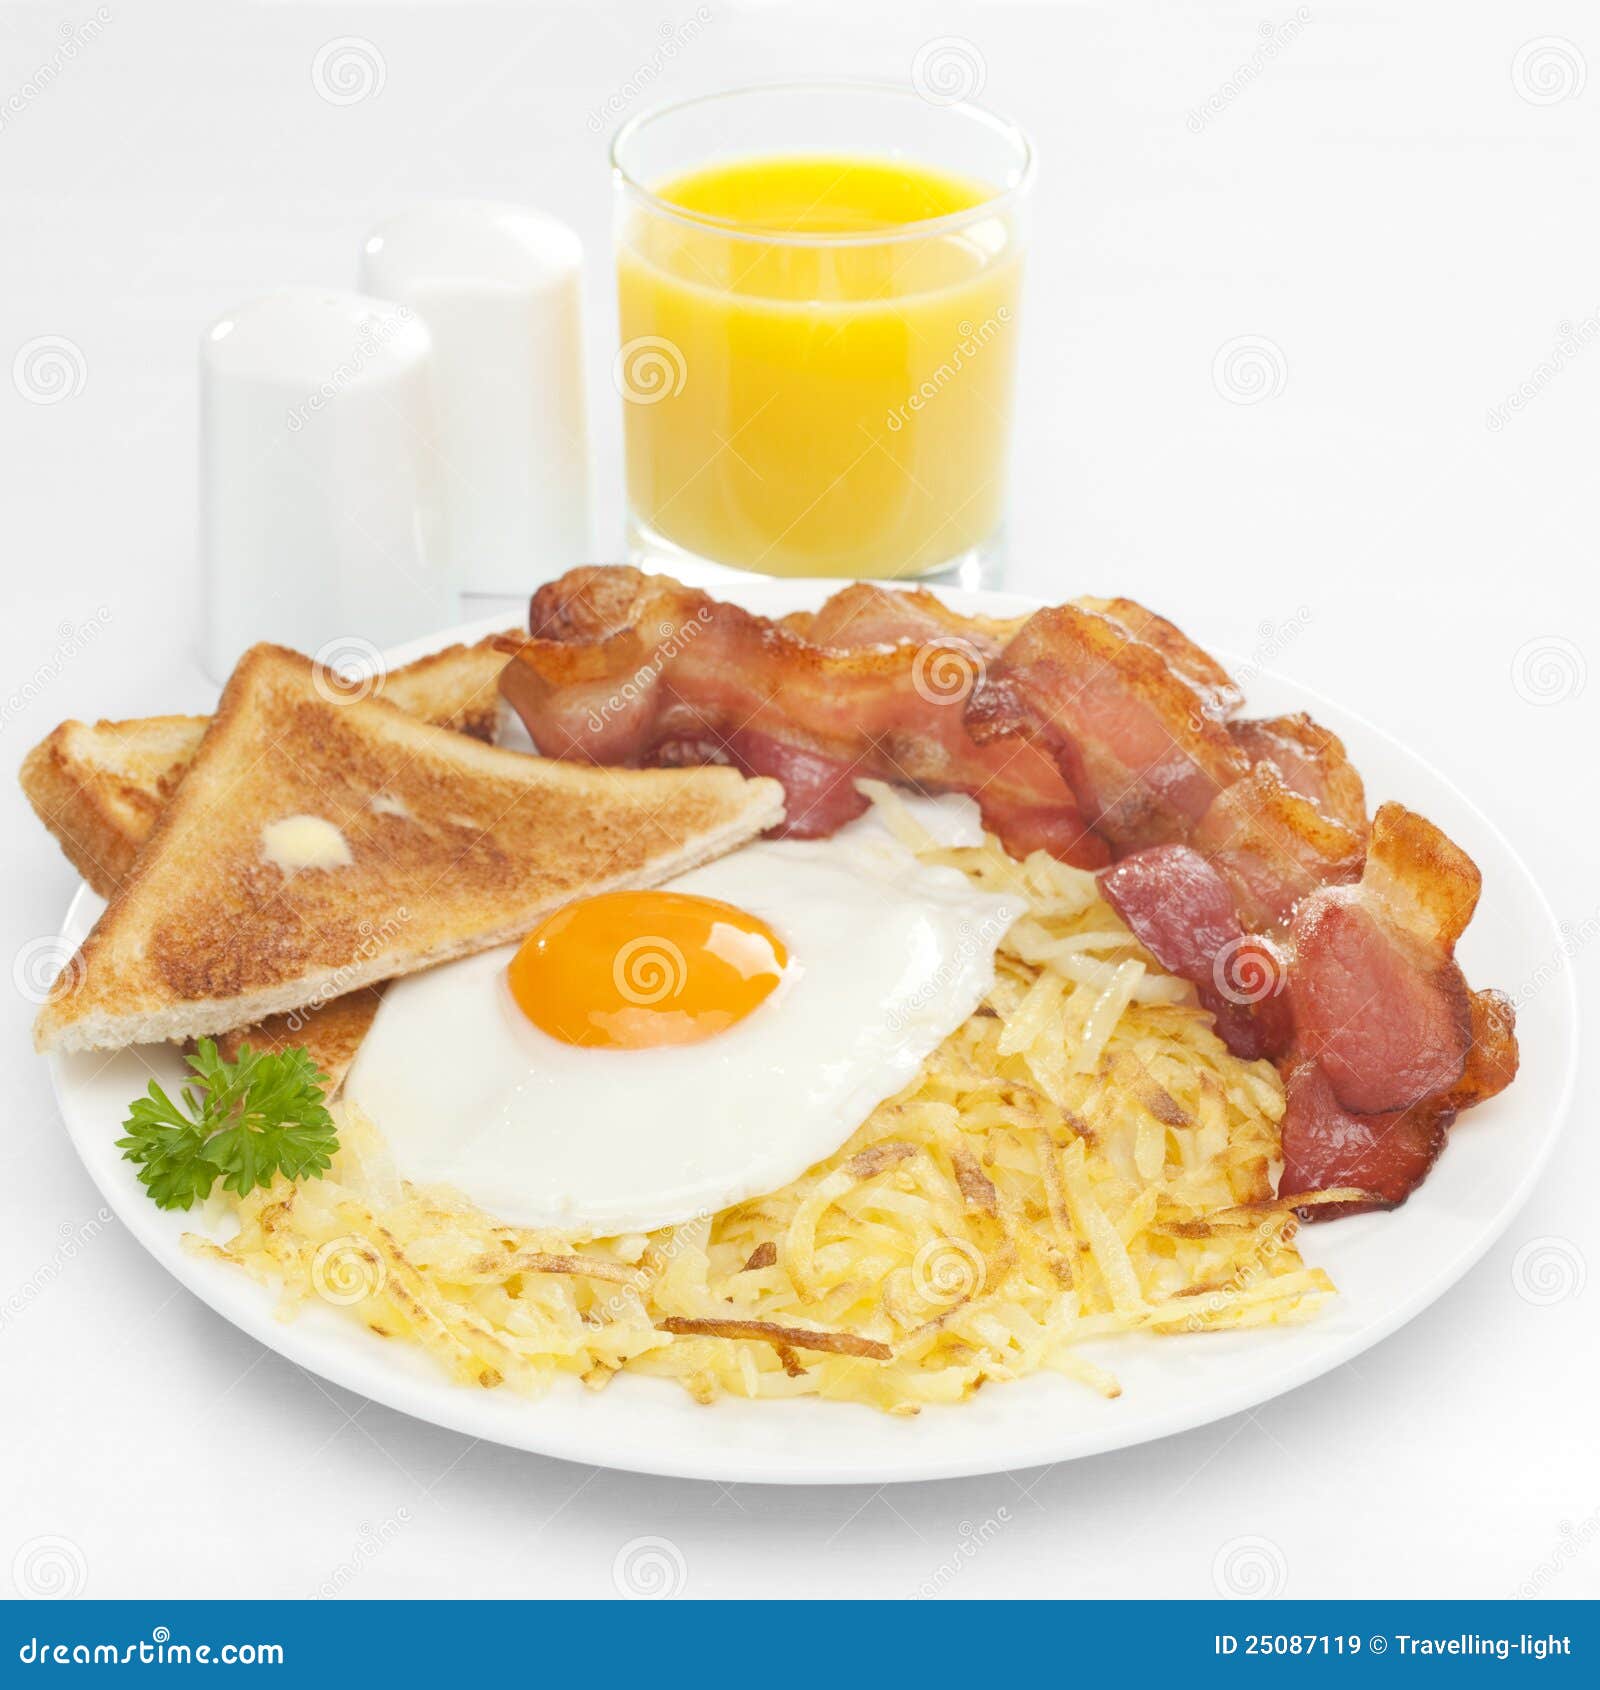 American Breakfast Royalty Free Stock Images - Image: 25087119